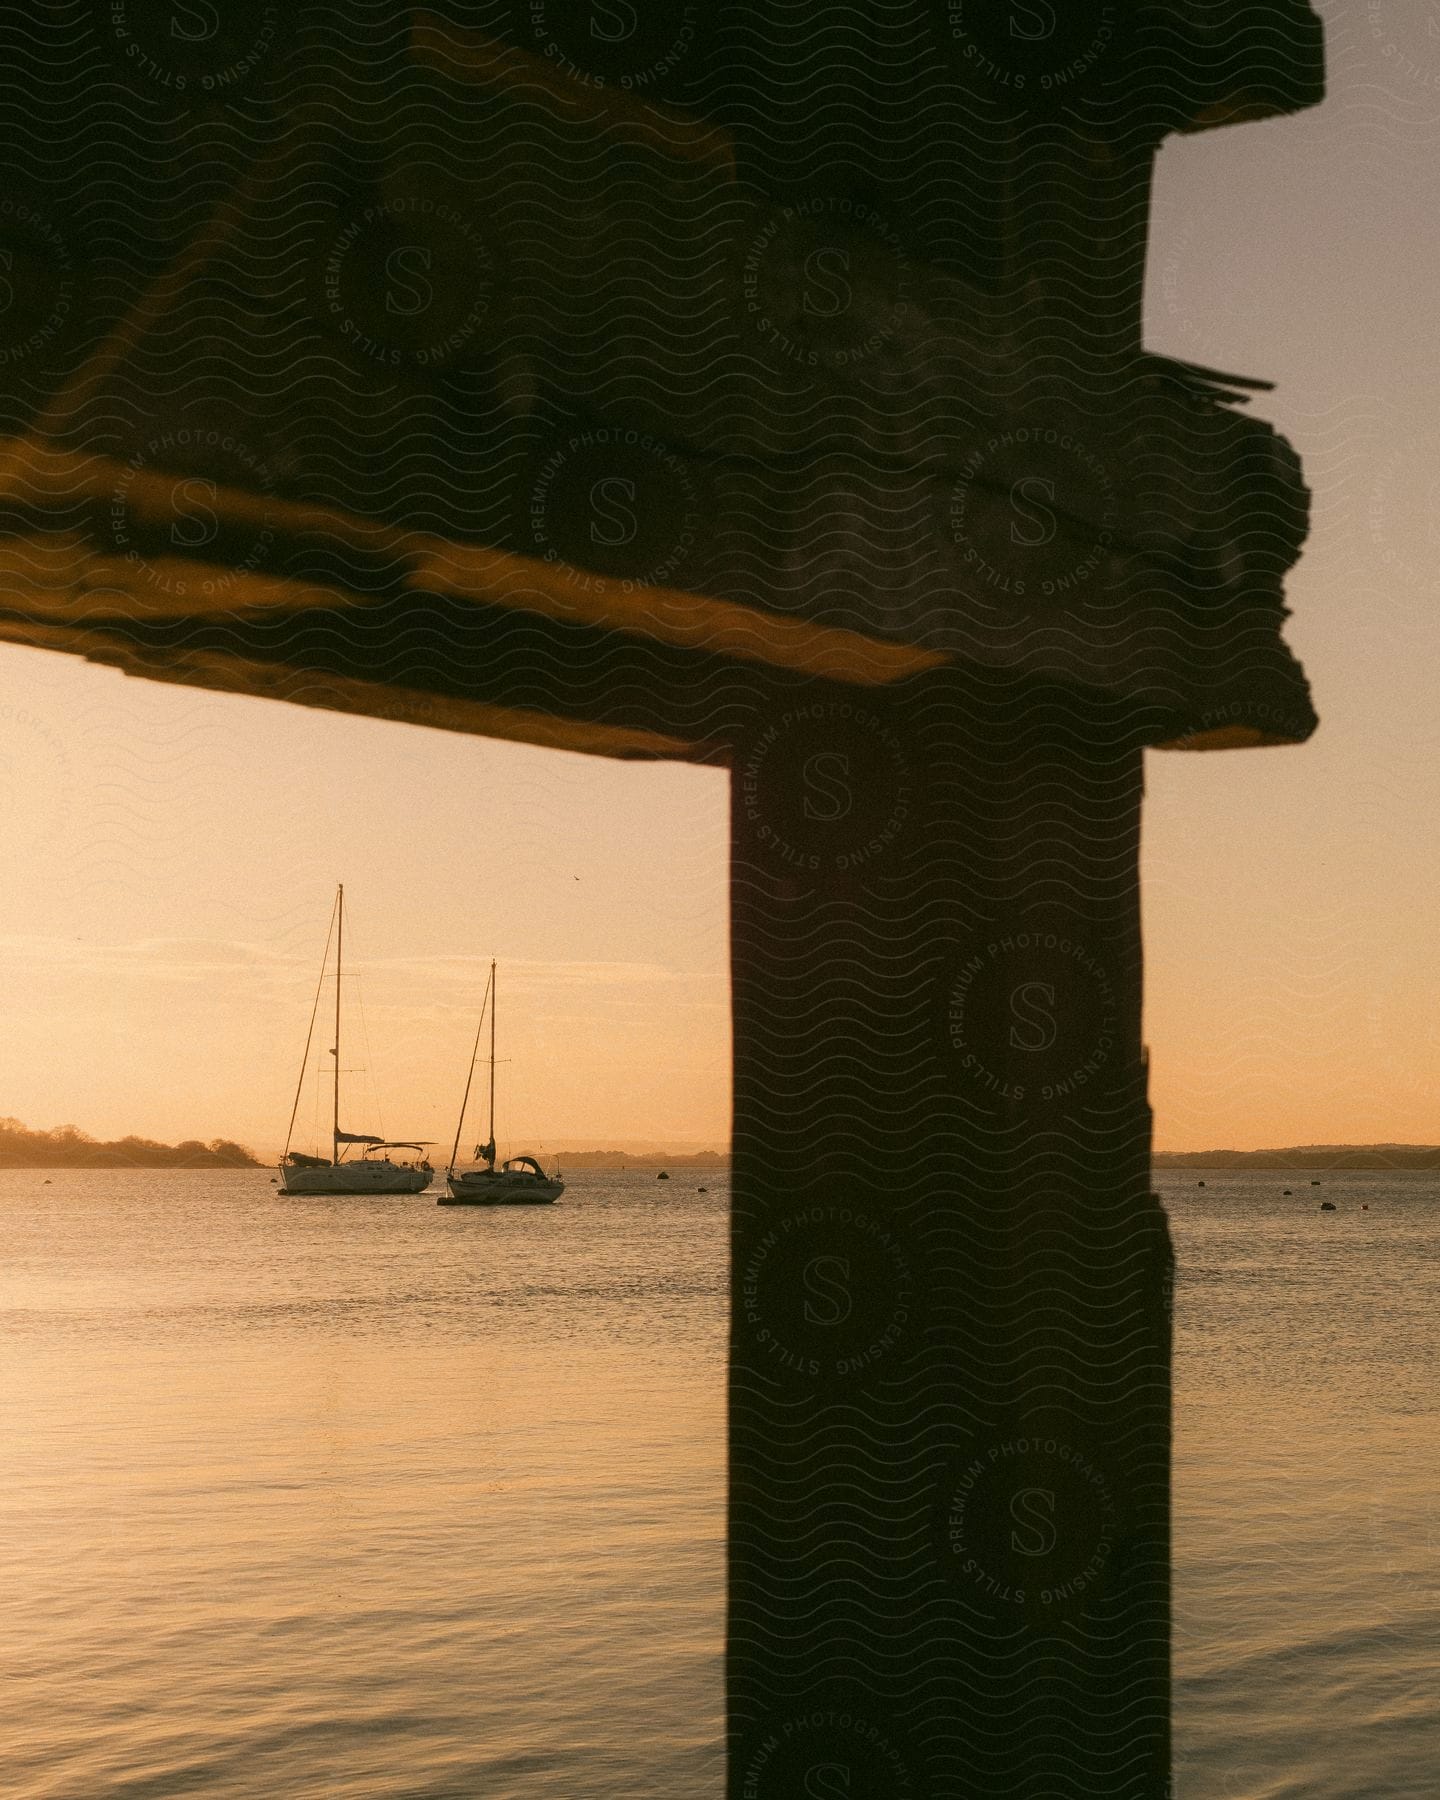 A serene sunset scene in a harbor, with two sailboats in the distance, framed by part of an aged wooden structure.